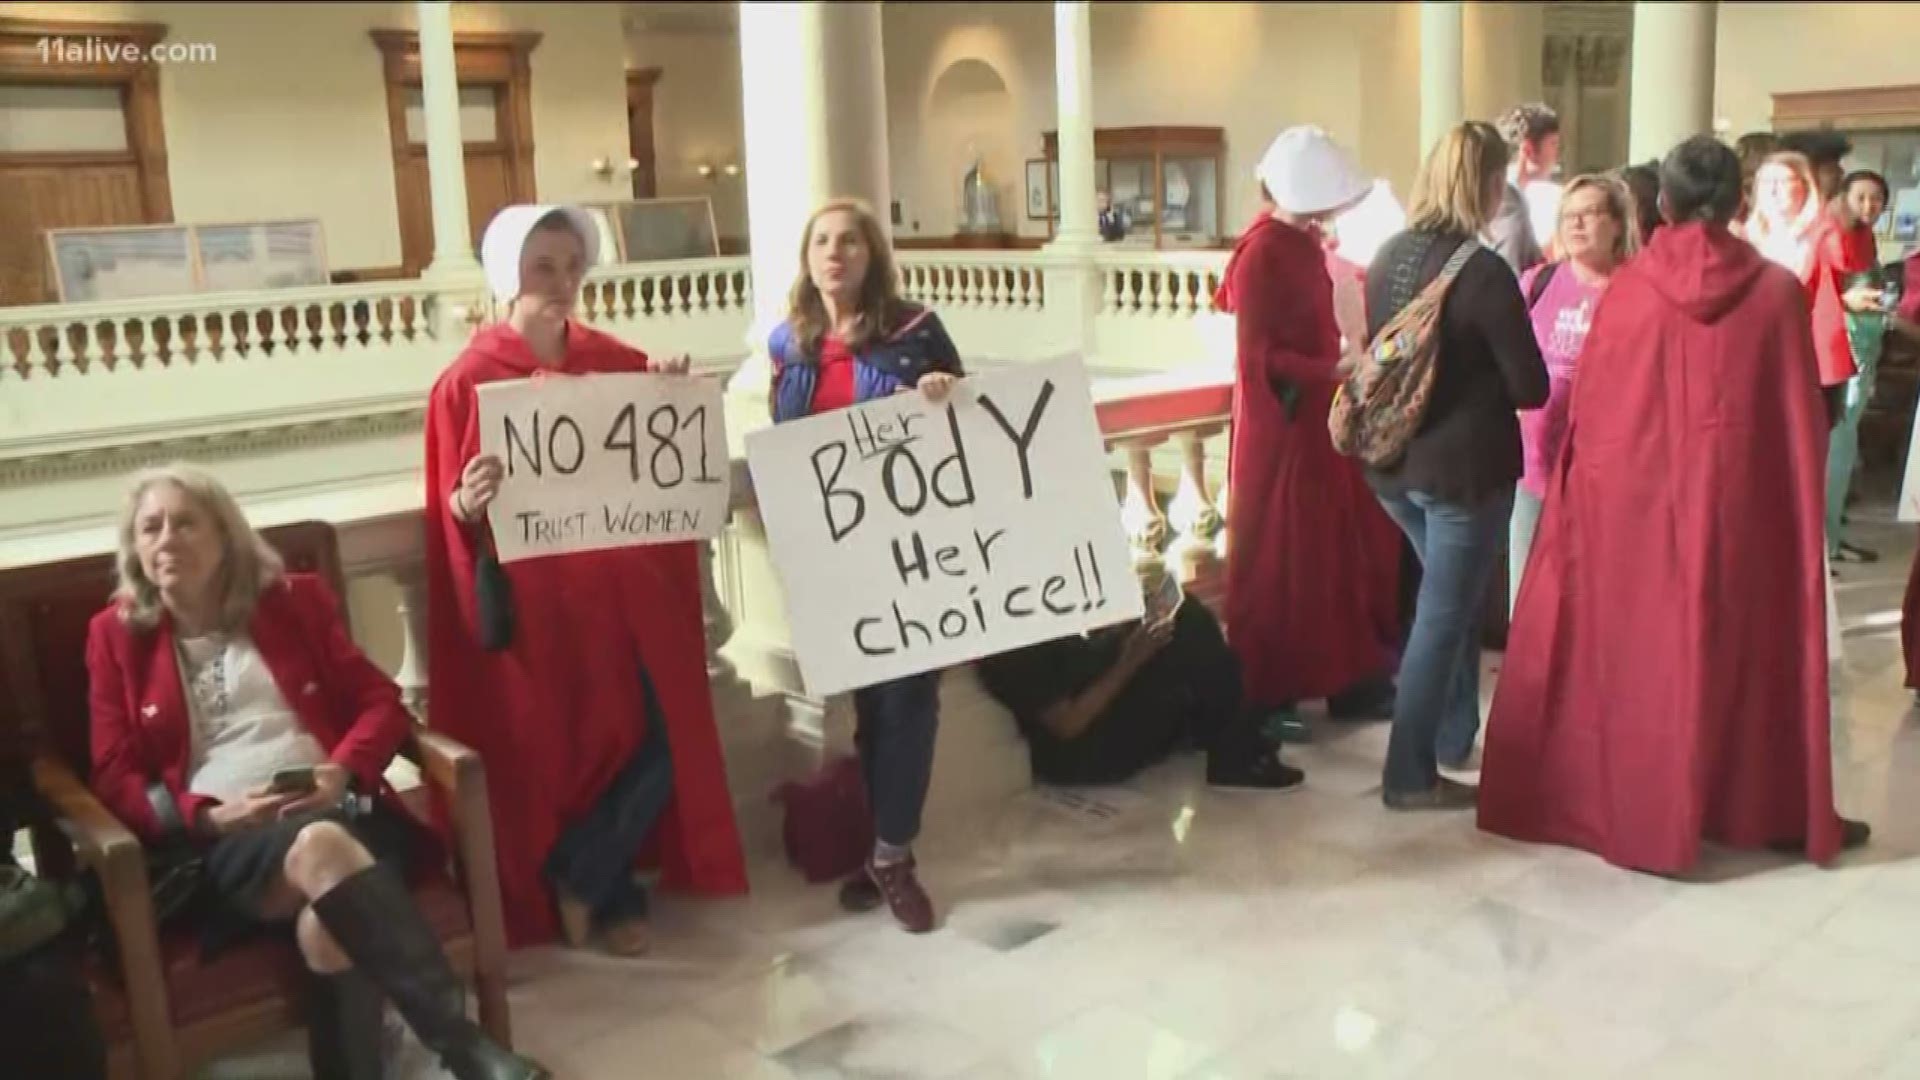 The bill would prohibit most abortions after a fetal heartbeat is detected - usually around 6 weeks.